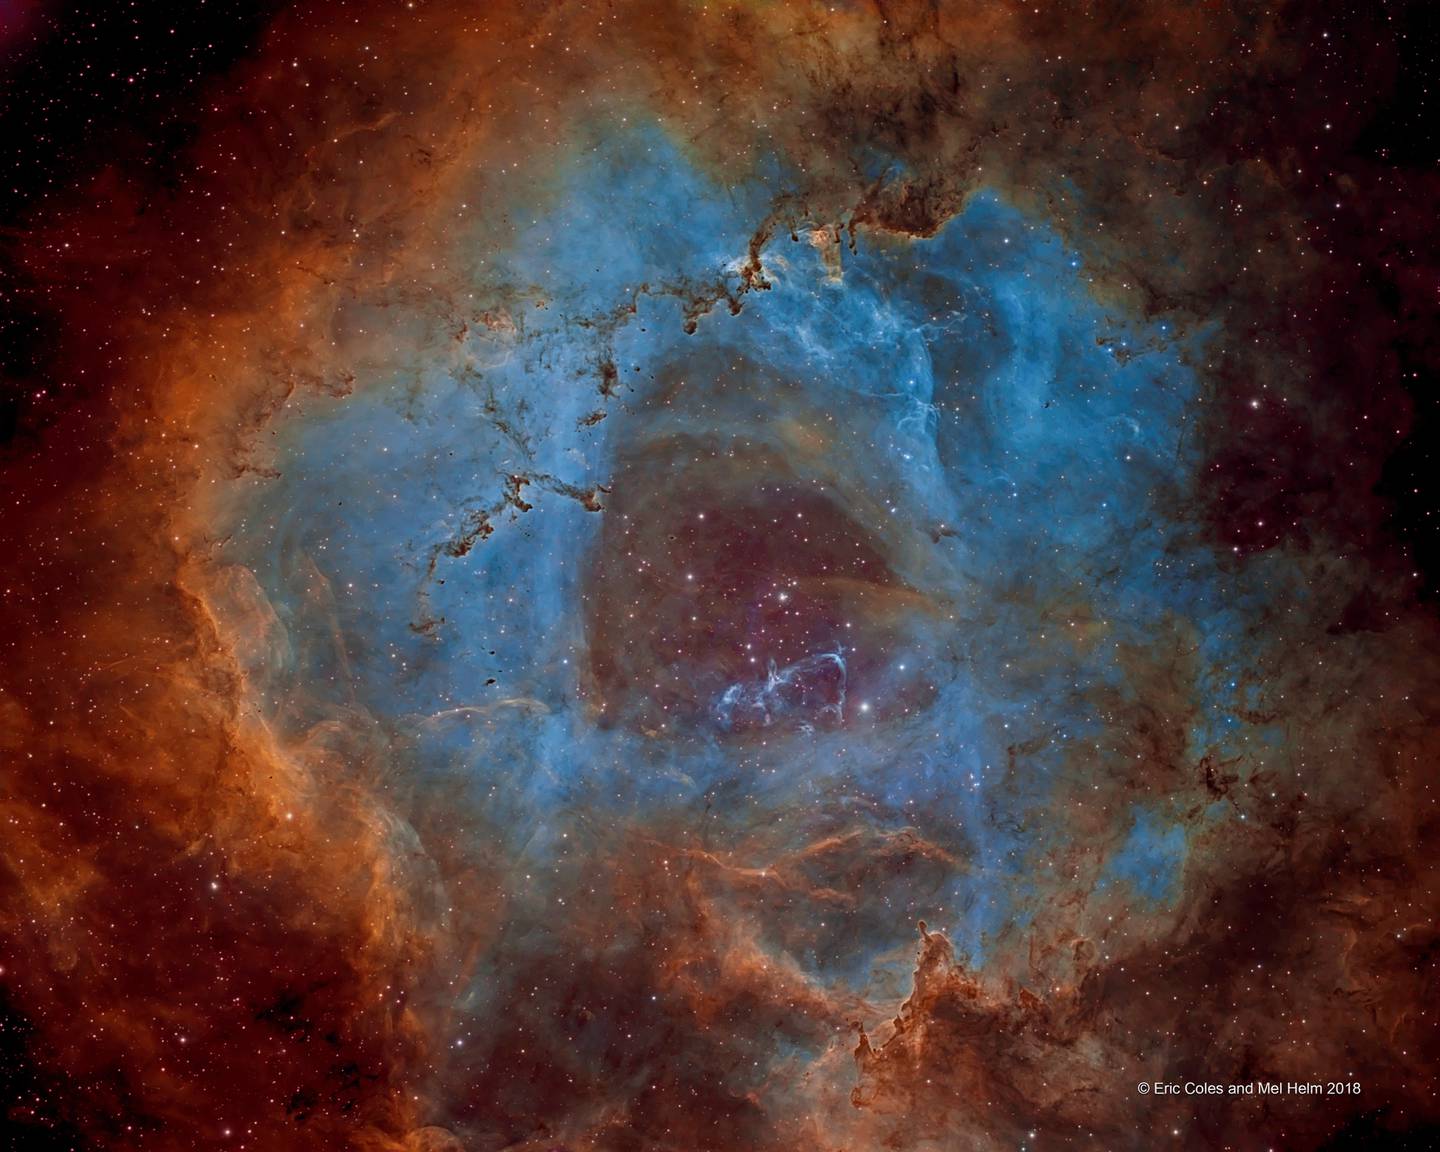 When Roses Aren't Red - APOD February 22, 2018 is one image of Eric Coles' 12 APODs - astronomy pictures of the day from NASA.